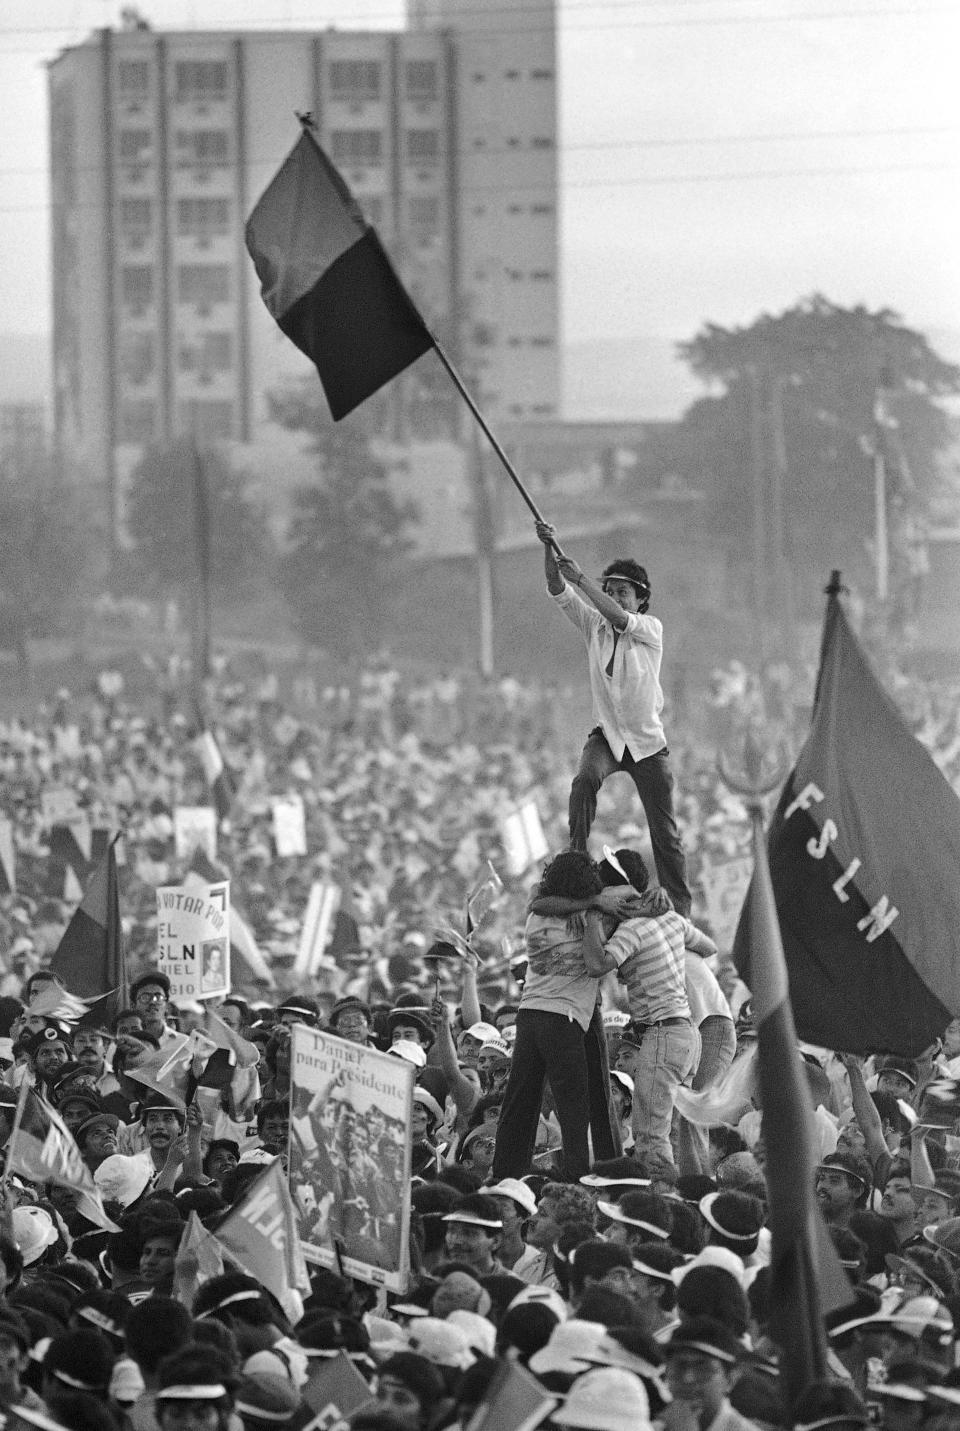 FILE - Sandinista youth form a human pyramid, waving their party colors in front of Commandante Daniel Ortega, Nov. 4, 1984, in downtown Managua, Nicaragua, during his last political rally of the presidential elections. Pat Hamilton, a combat veteran of the Vietnam War who covered the civil wars in Central America as a photojournalist for The Associated Press, and who later worked at Reuters covering the Gulf War in Iraq, died Sunday, Aug. 13, 2023, after a long struggle with cancer. He was 74. (AP Photo/Pat Hamilton, File)